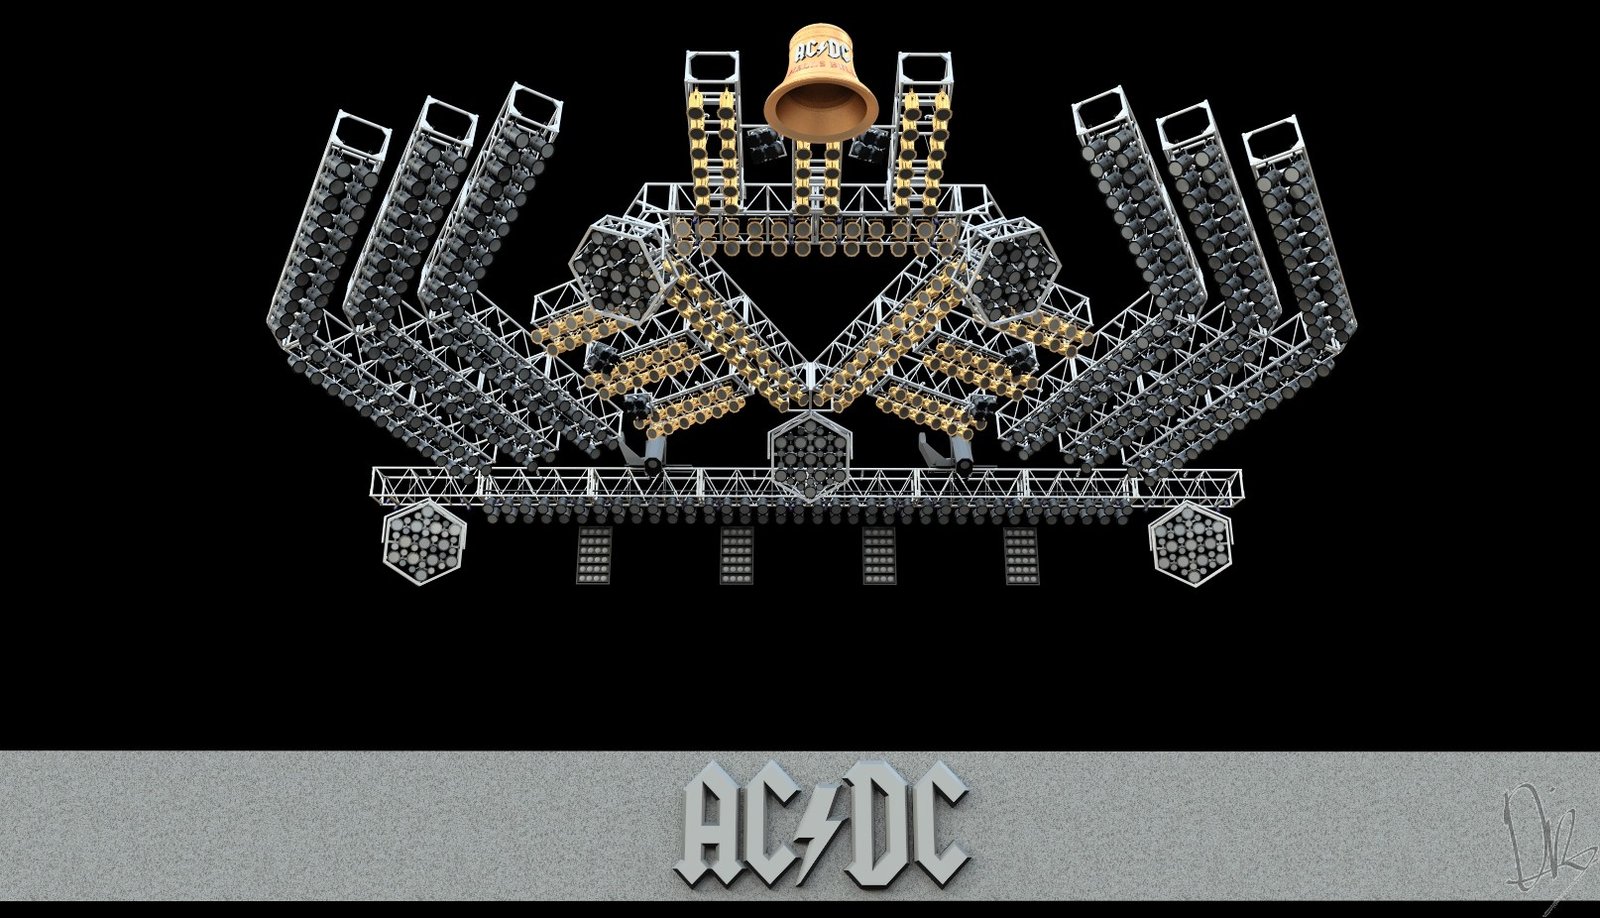 jord myndighed tempo AC/DC 1983 “Flick of the Switch” North American tour lighting system -  Historical Society for Concert Touring